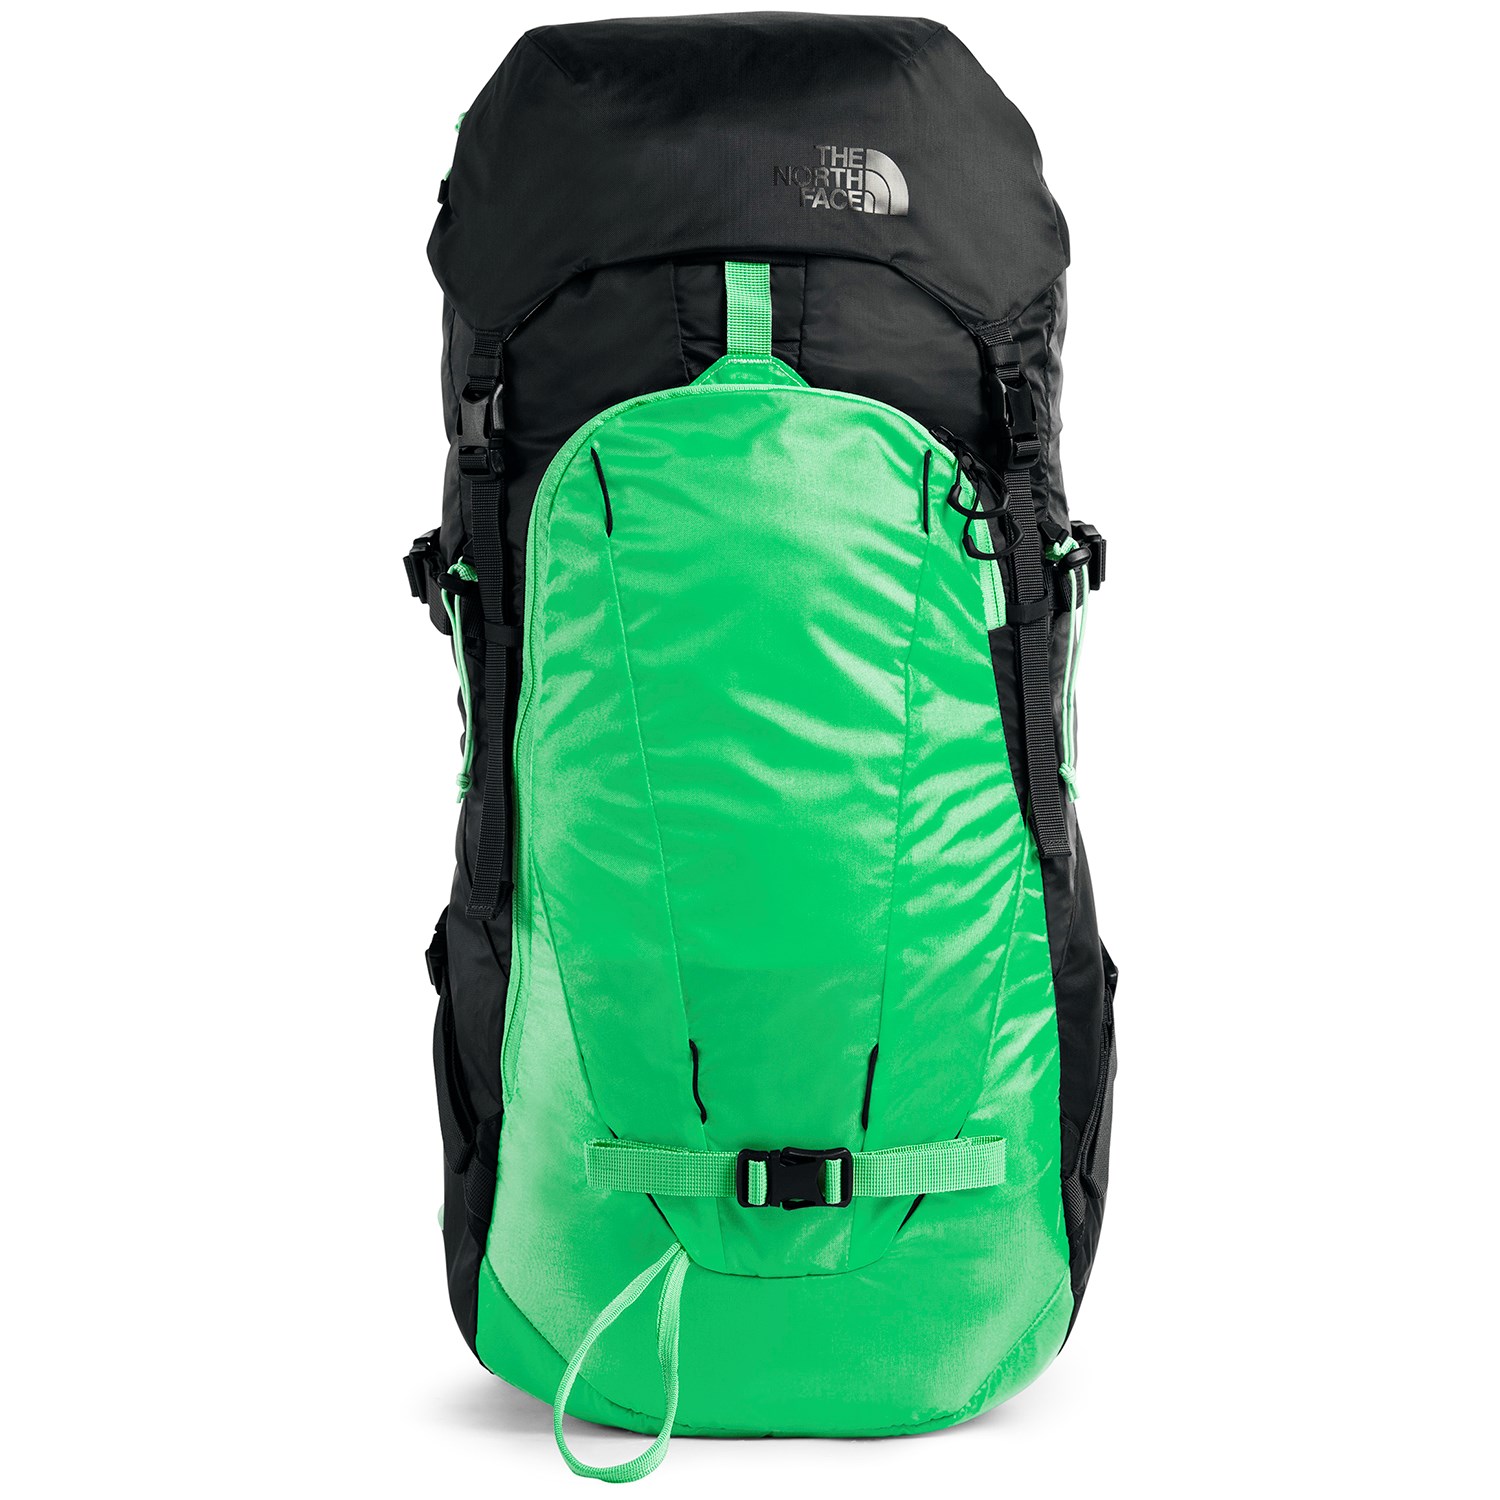 The North Face Forecaster 35 Backpack | evo